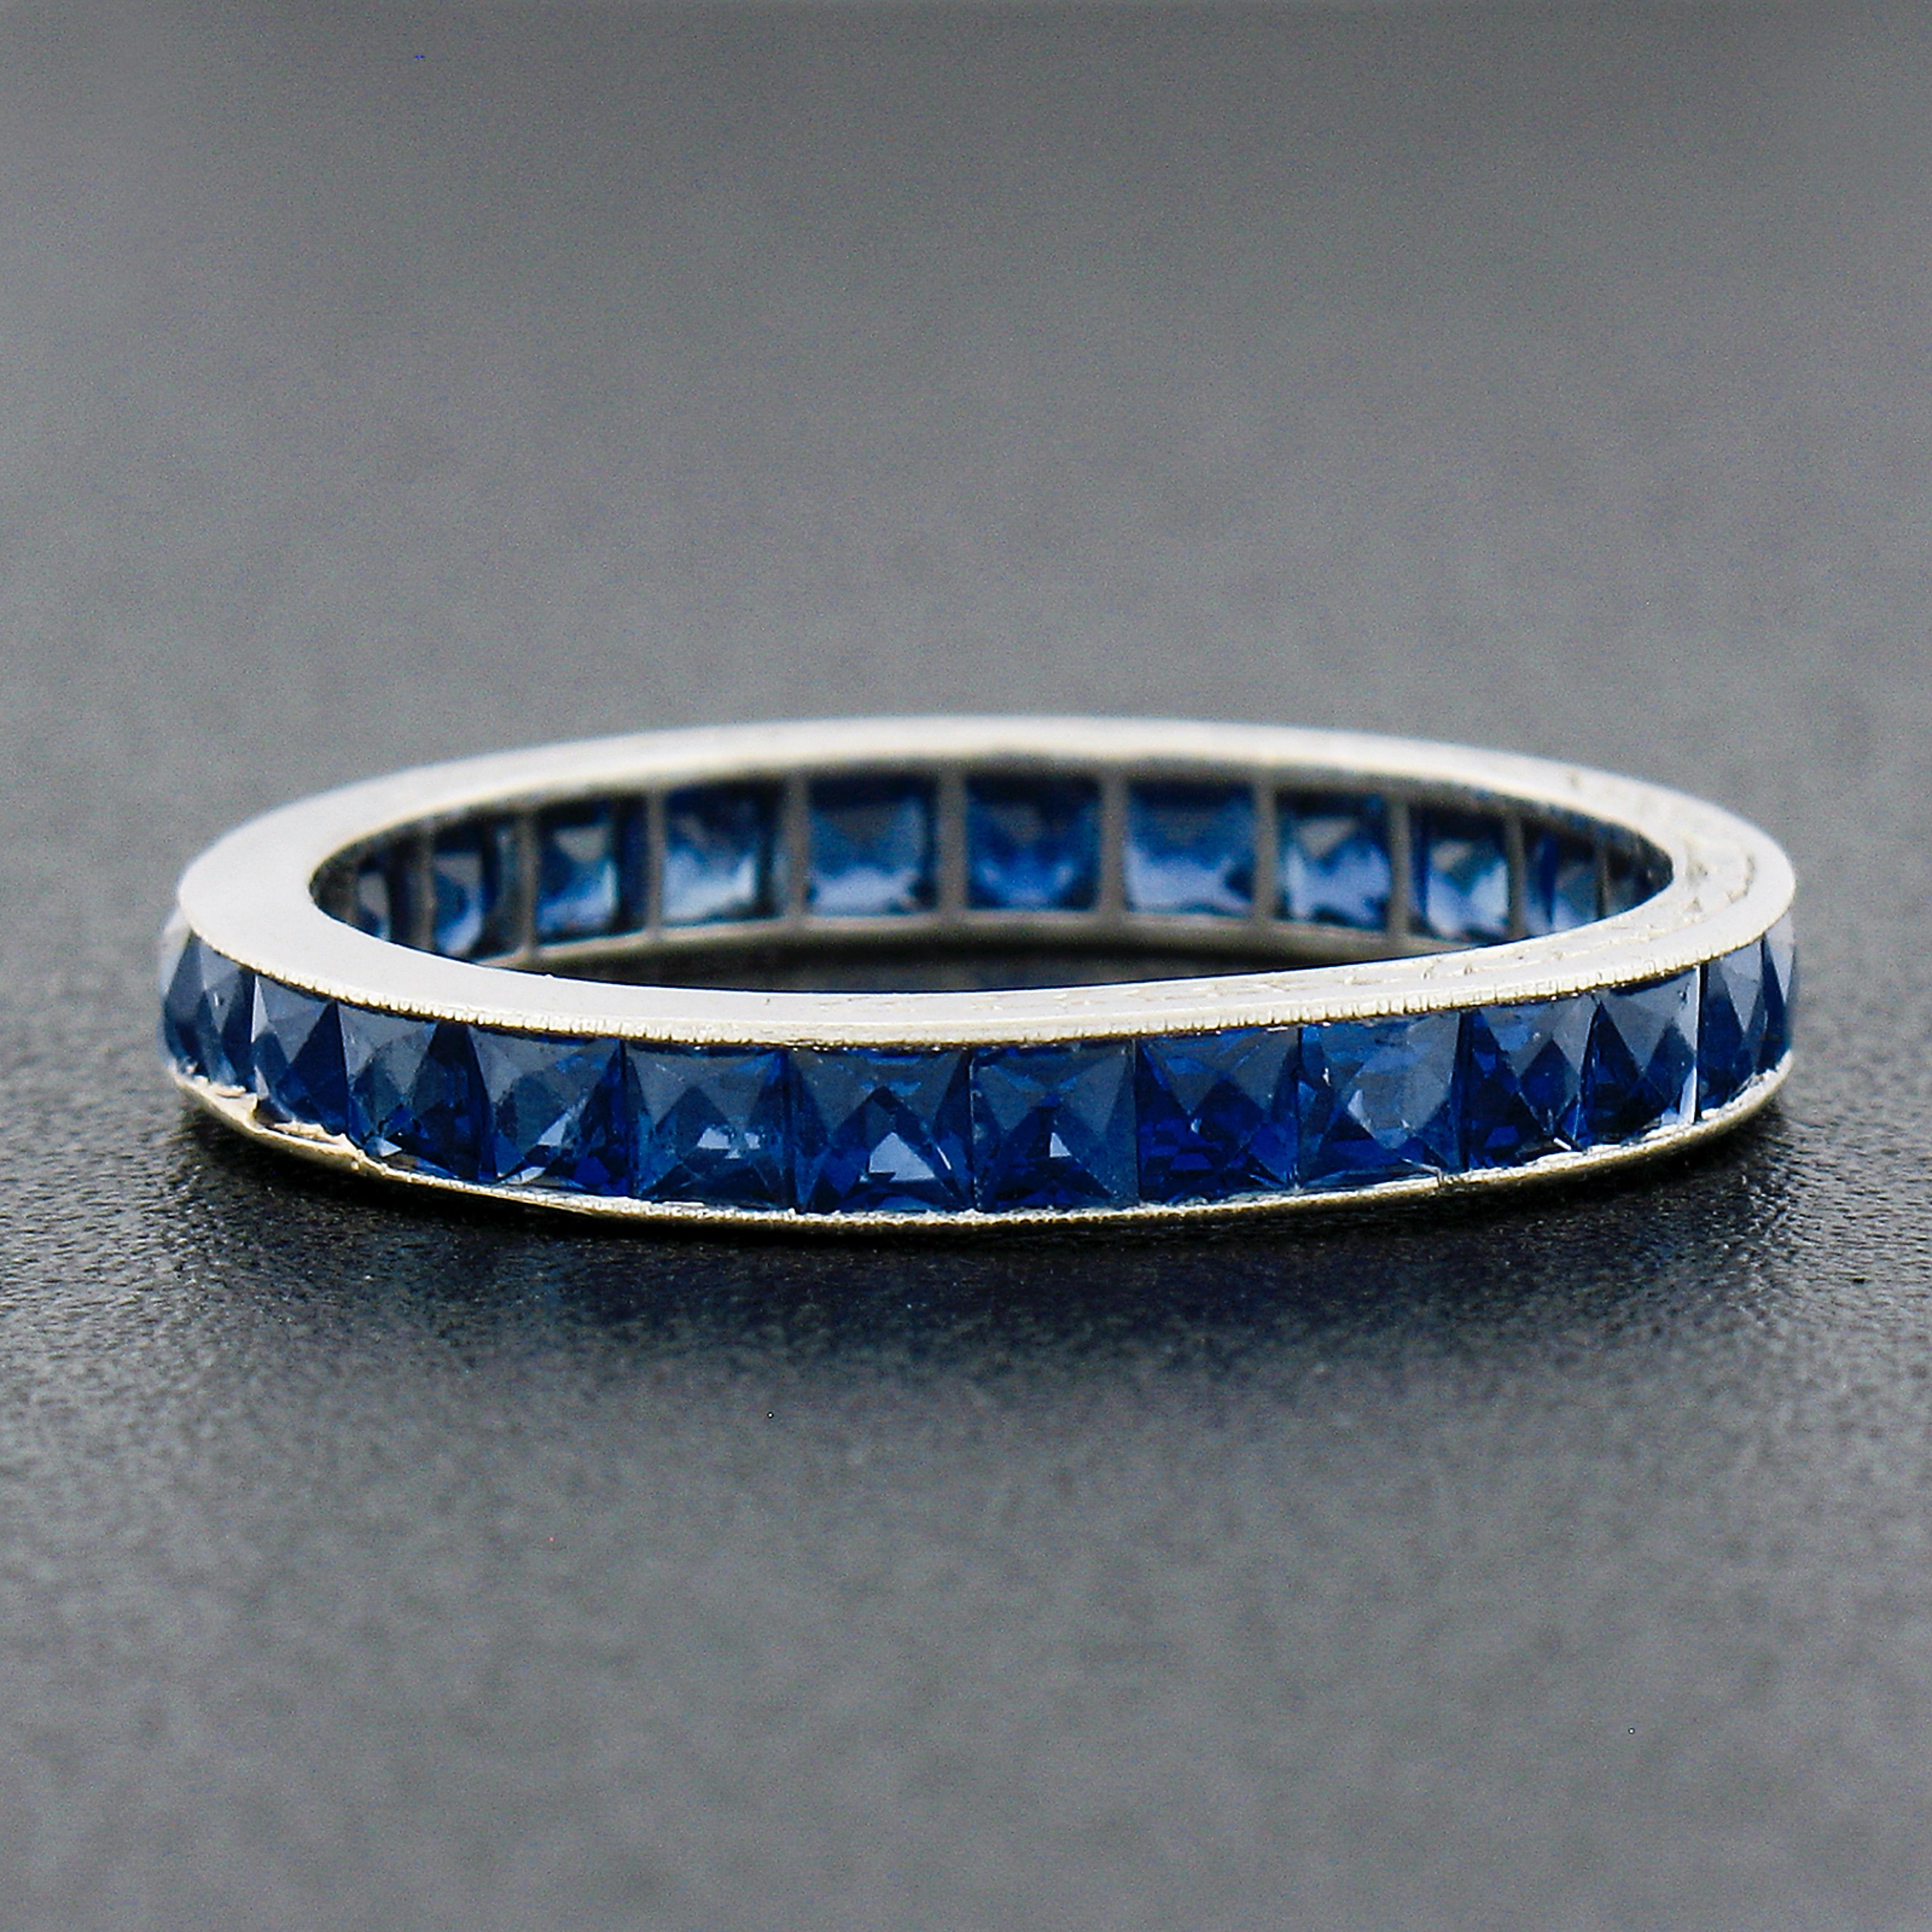 Antique Deco Platinum GIA Burma French Cut Sapphire Engraved Eternity Band Ring 1